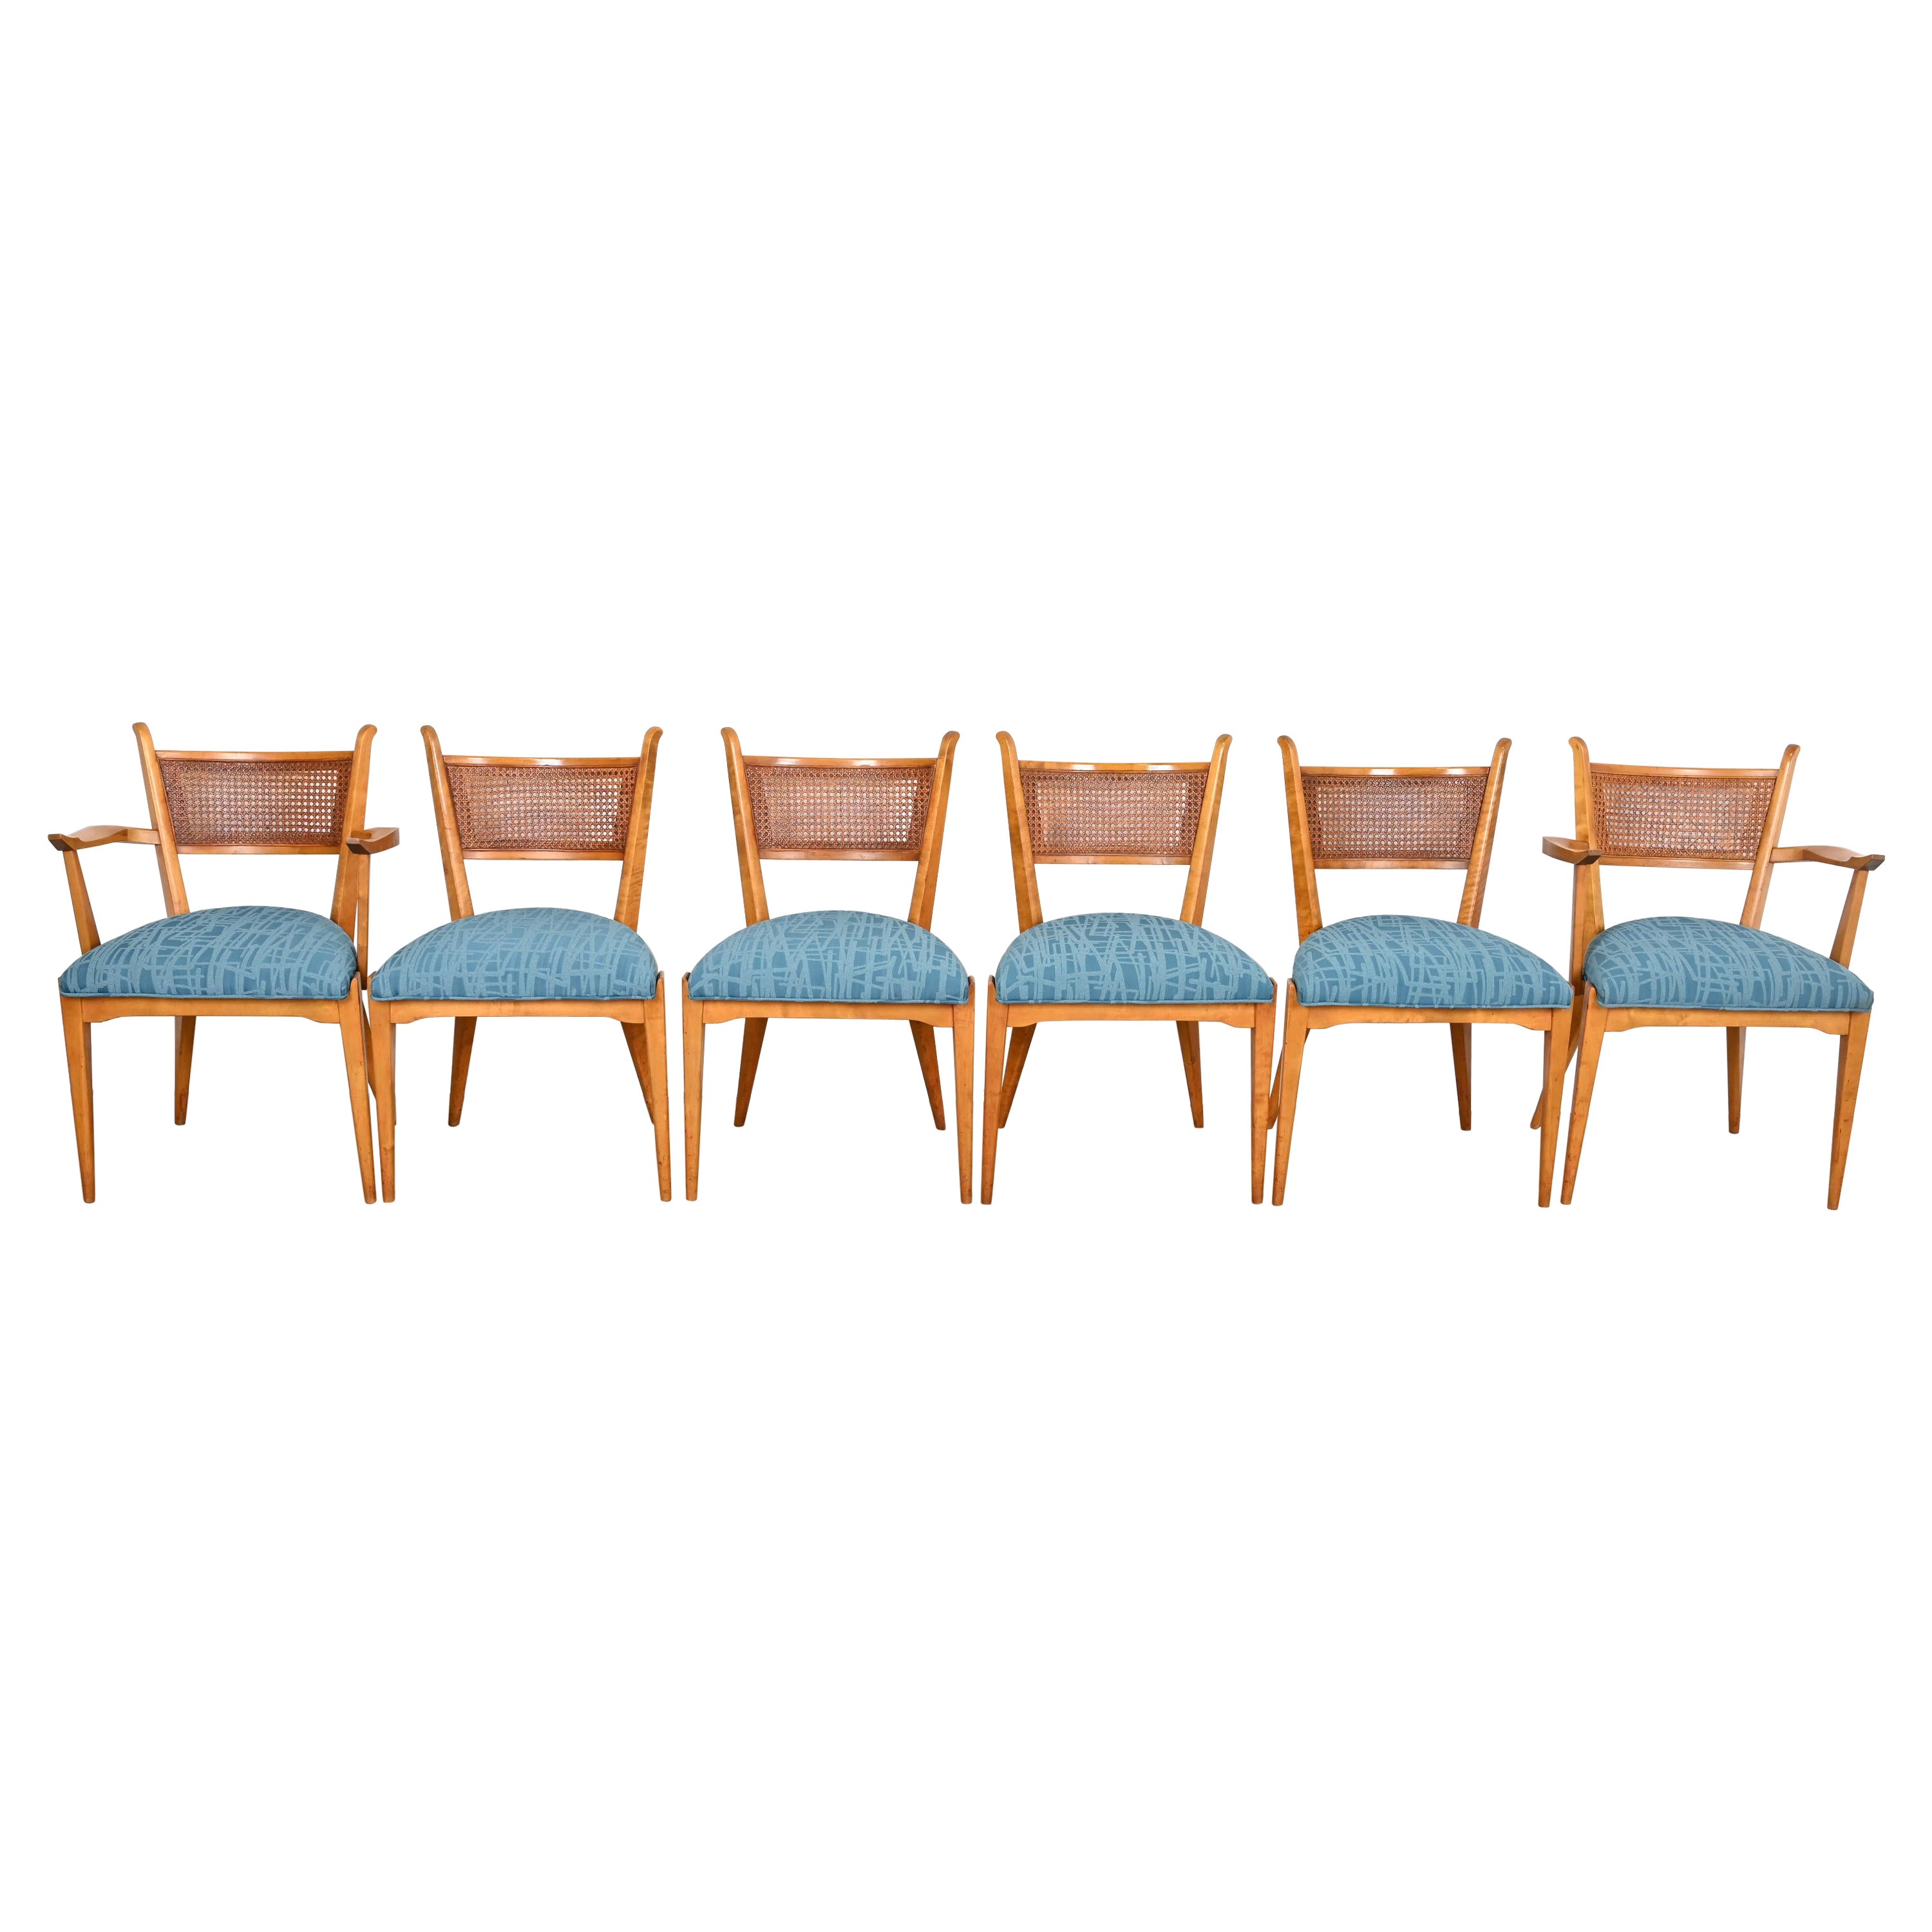 Edmond Spence Swedish Modern Maple and Cane Dining Chairs, Newly Reupholstered For Sale